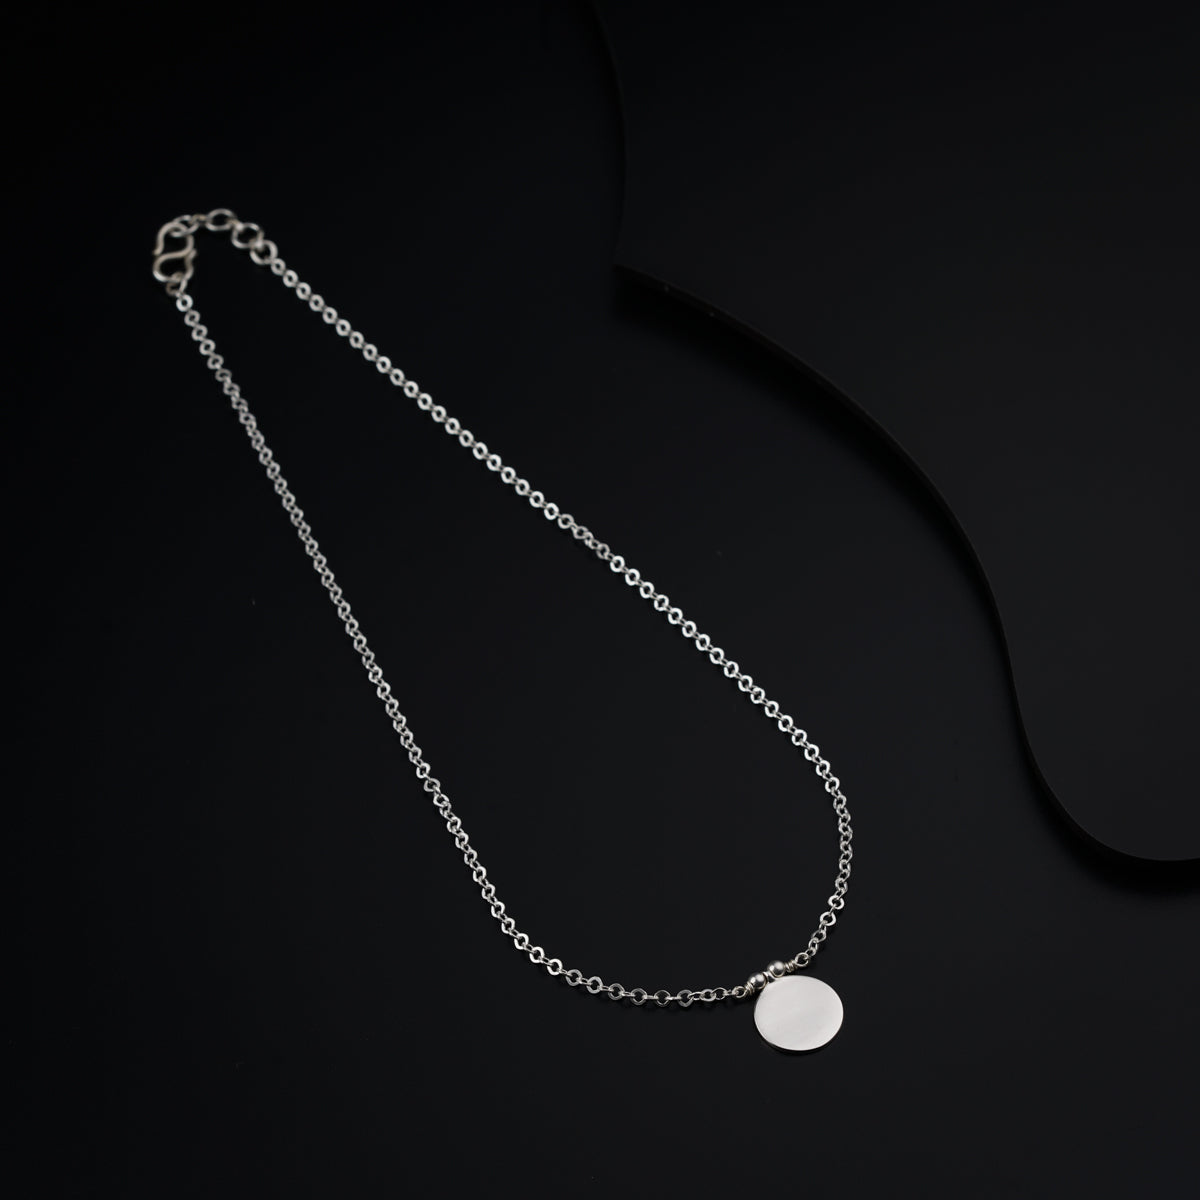 Single Coin Necklace: Small